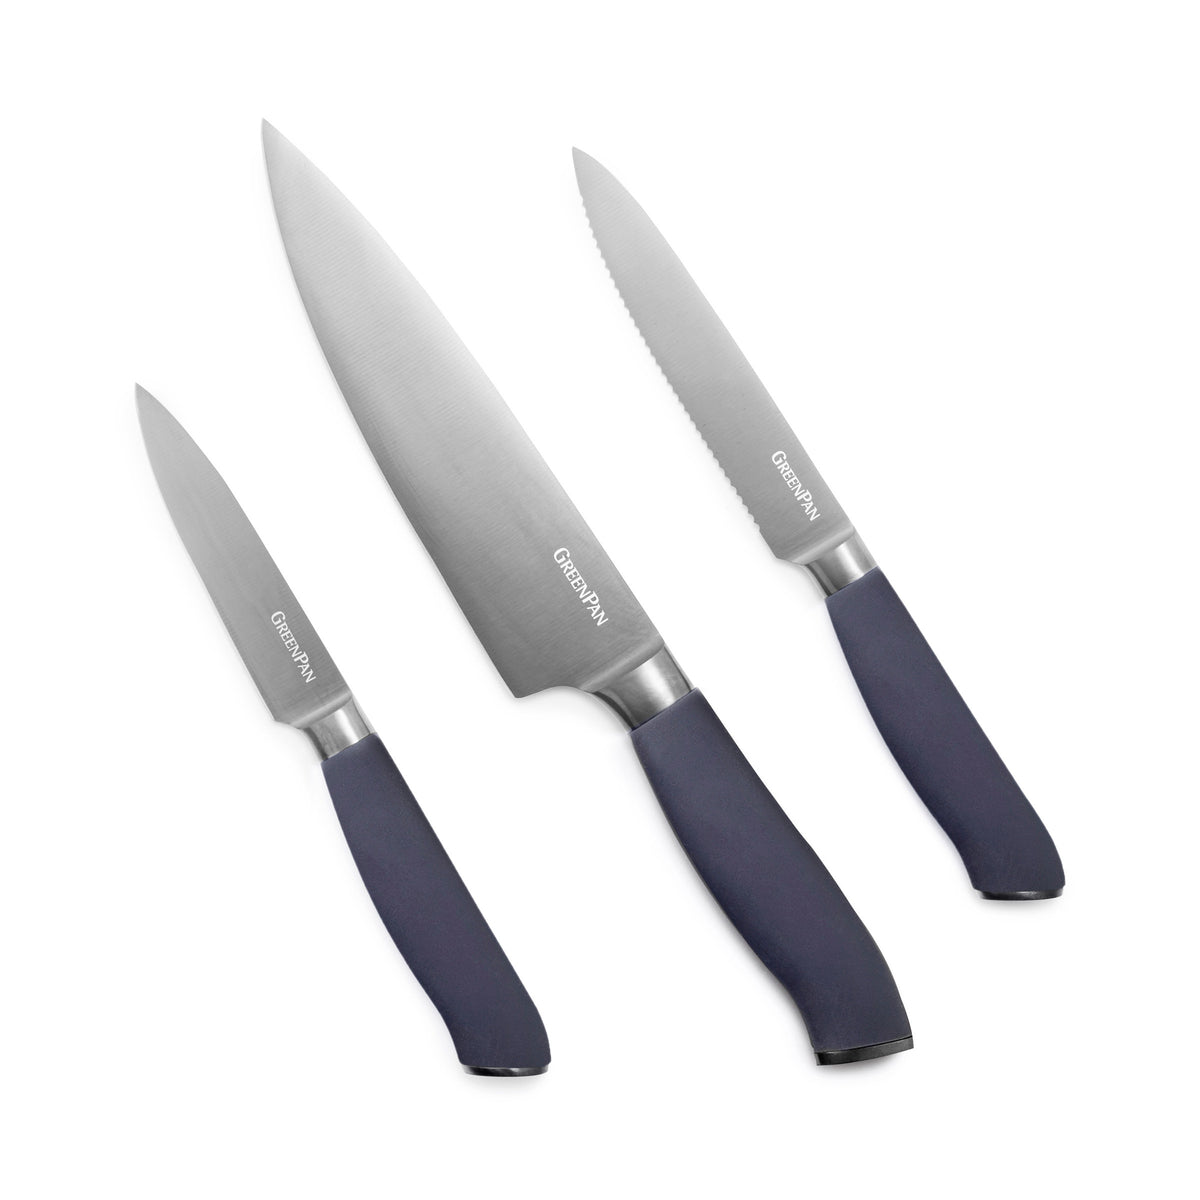  3-Piece Knives Set for Kitchen, Stainless Laser-Etched